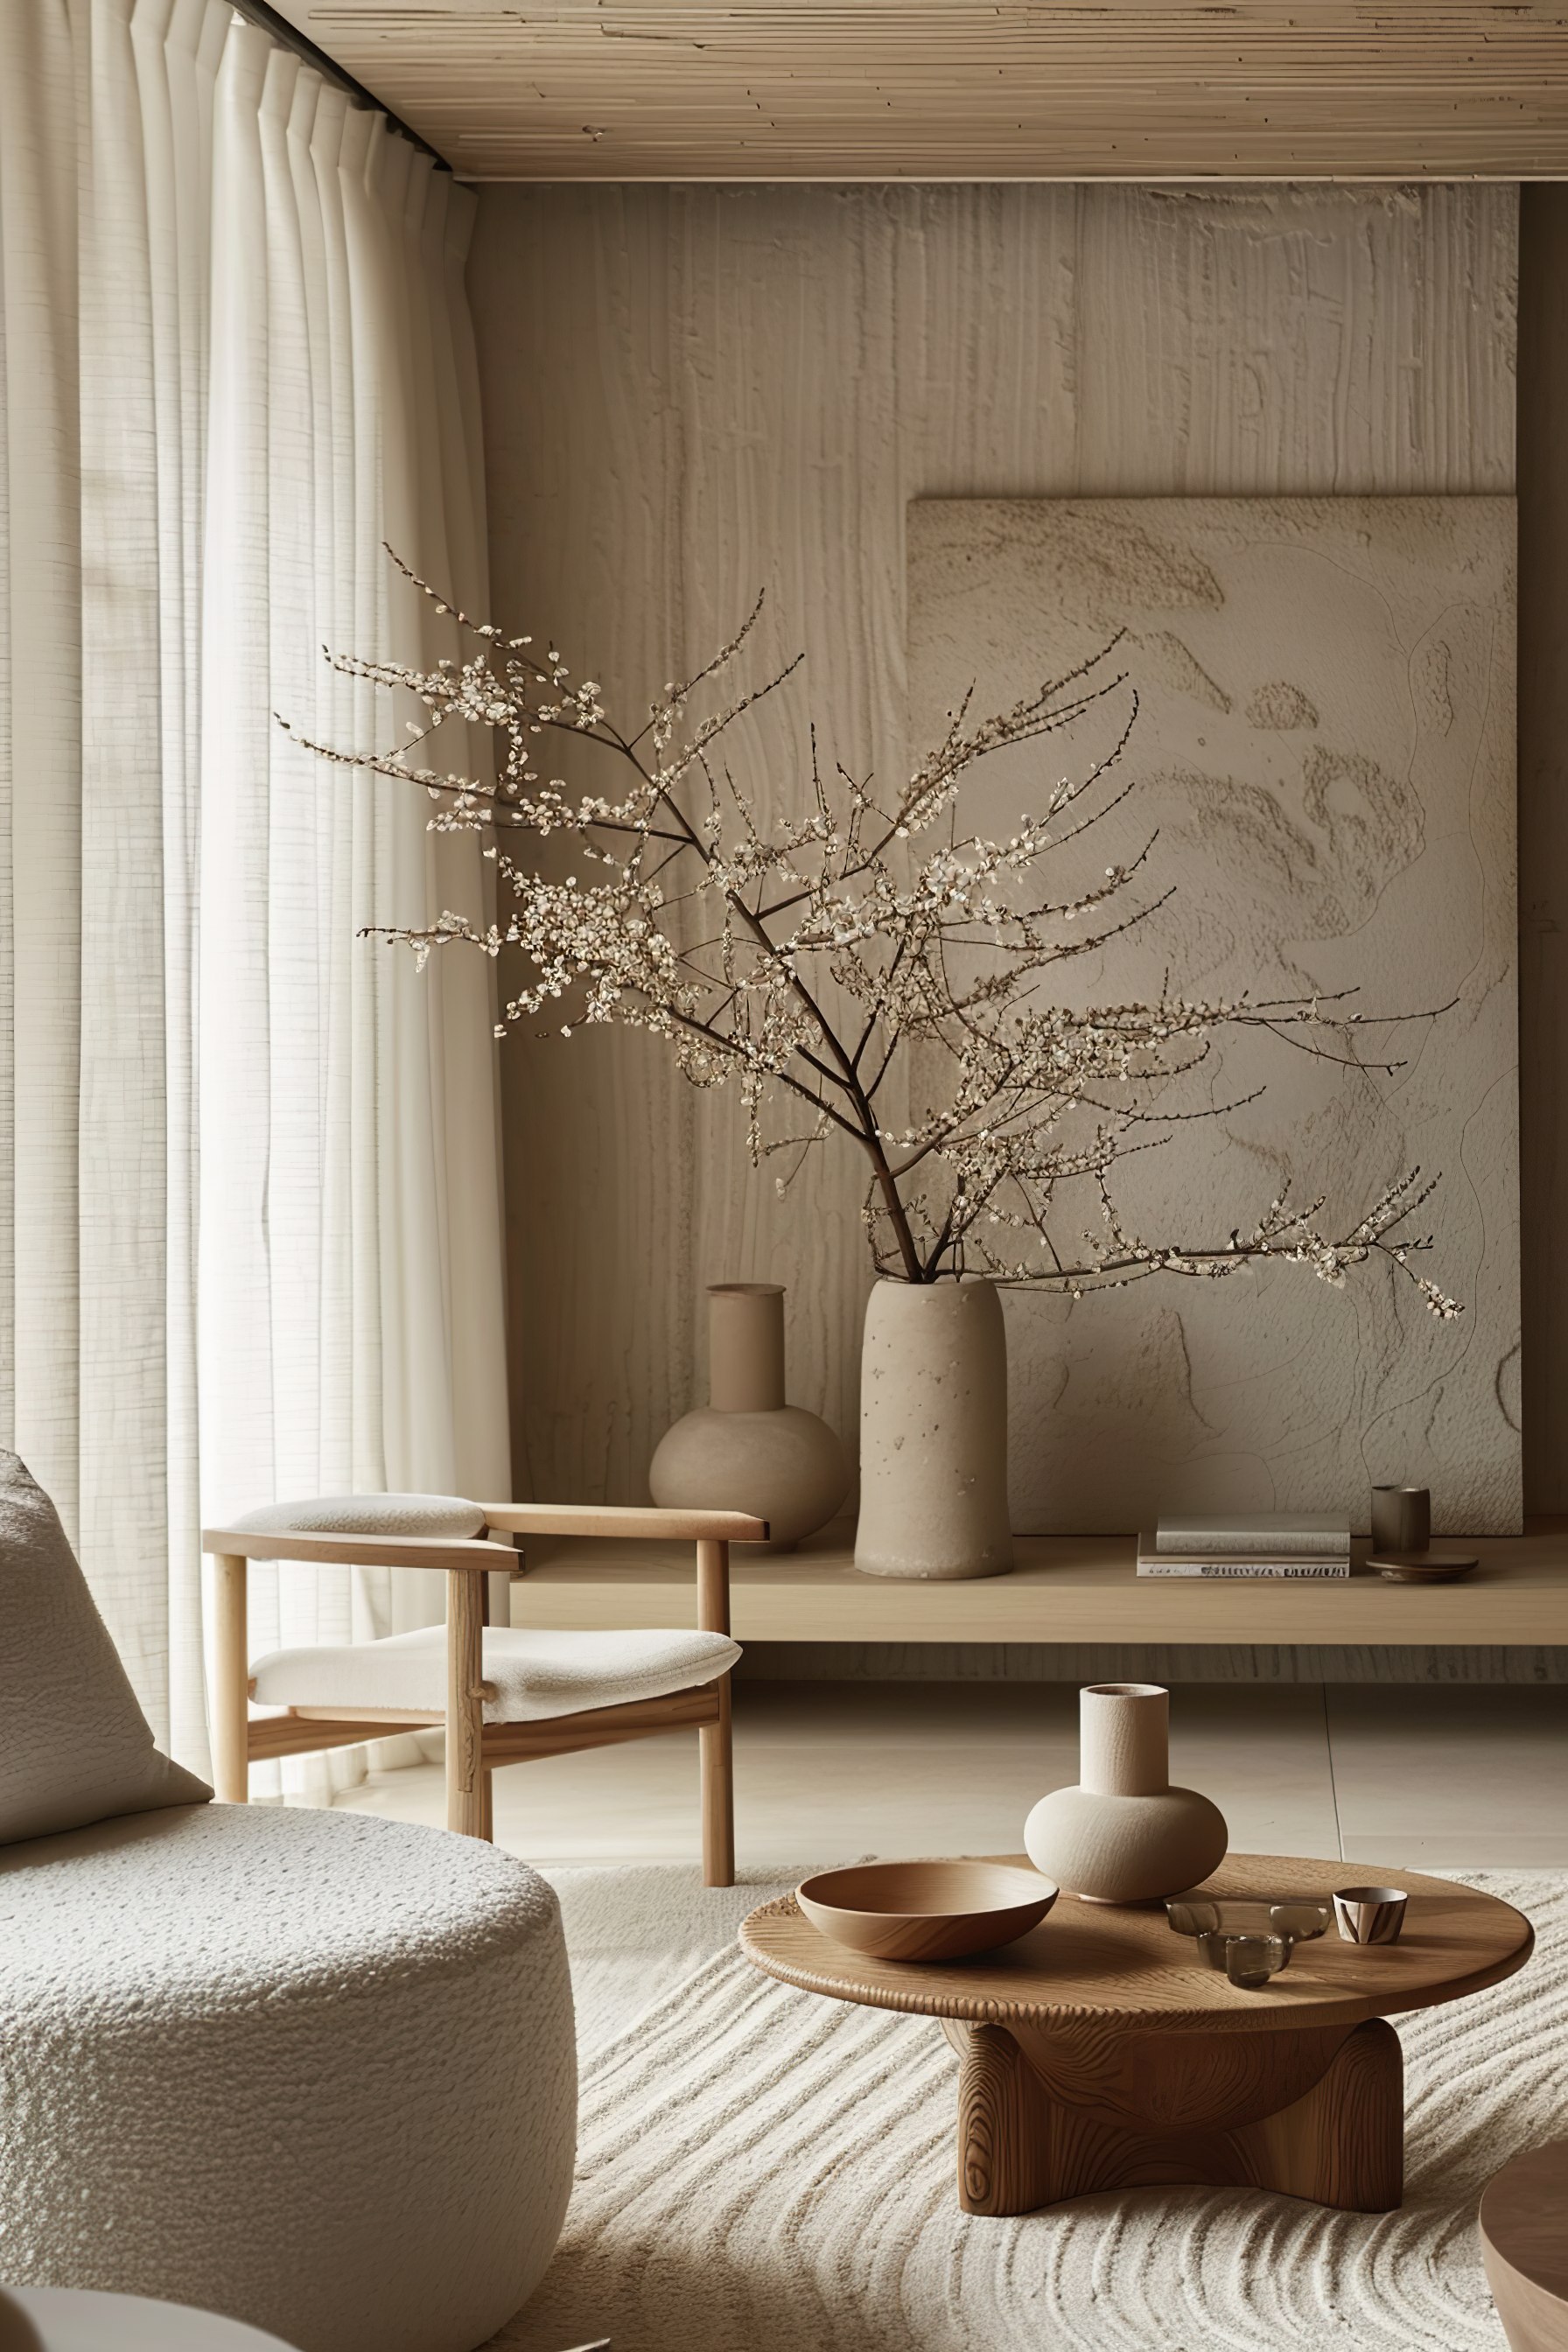 Minimalist living room with neutral tones, textured decor, and a vase of cherry blossoms.